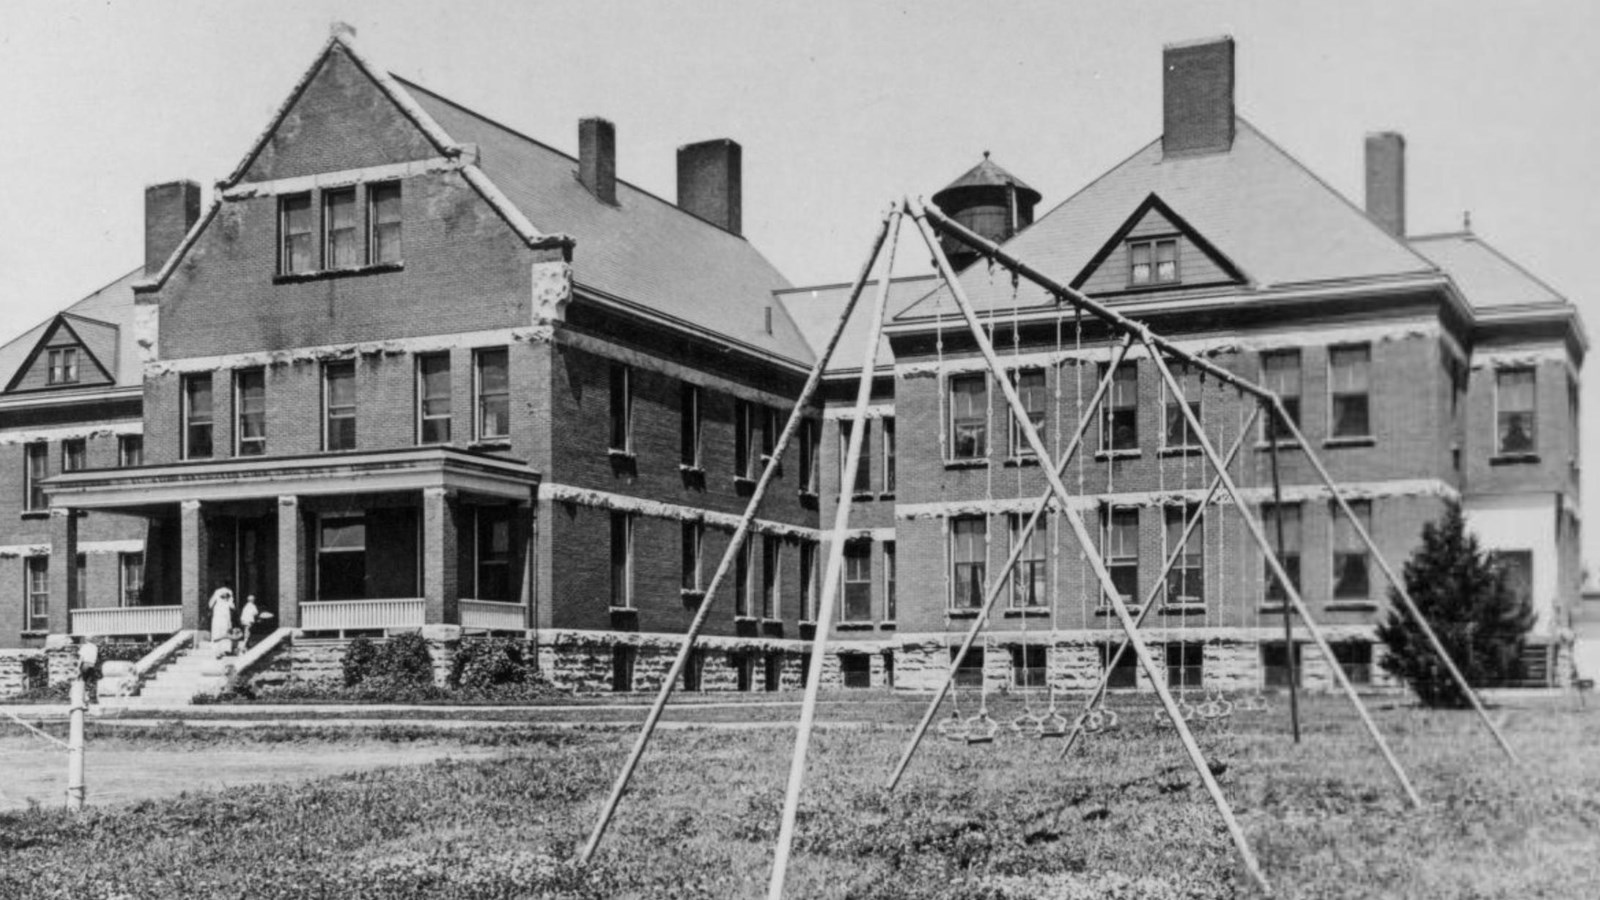 Large three-story building with two wings and dormers with a swing set in the foreground